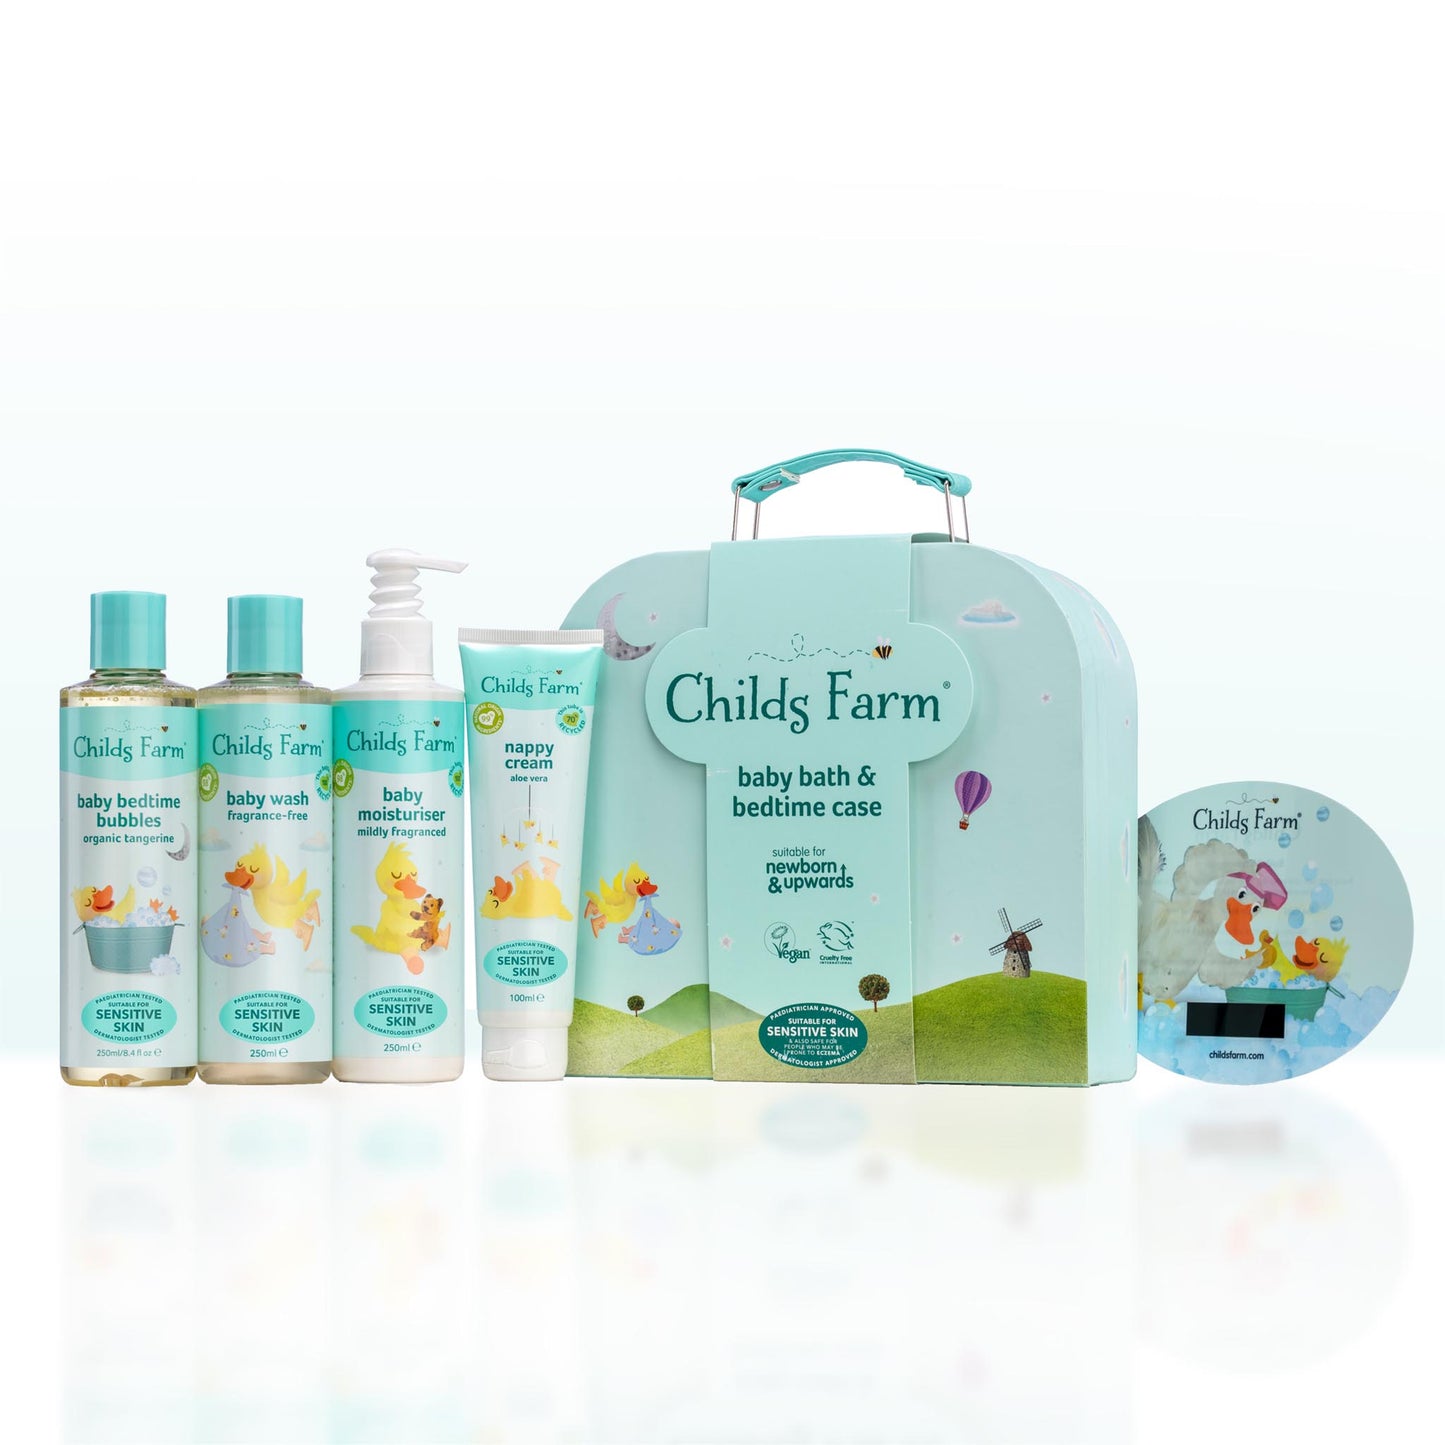 Childs Farm baby bedtime suitcase gift set